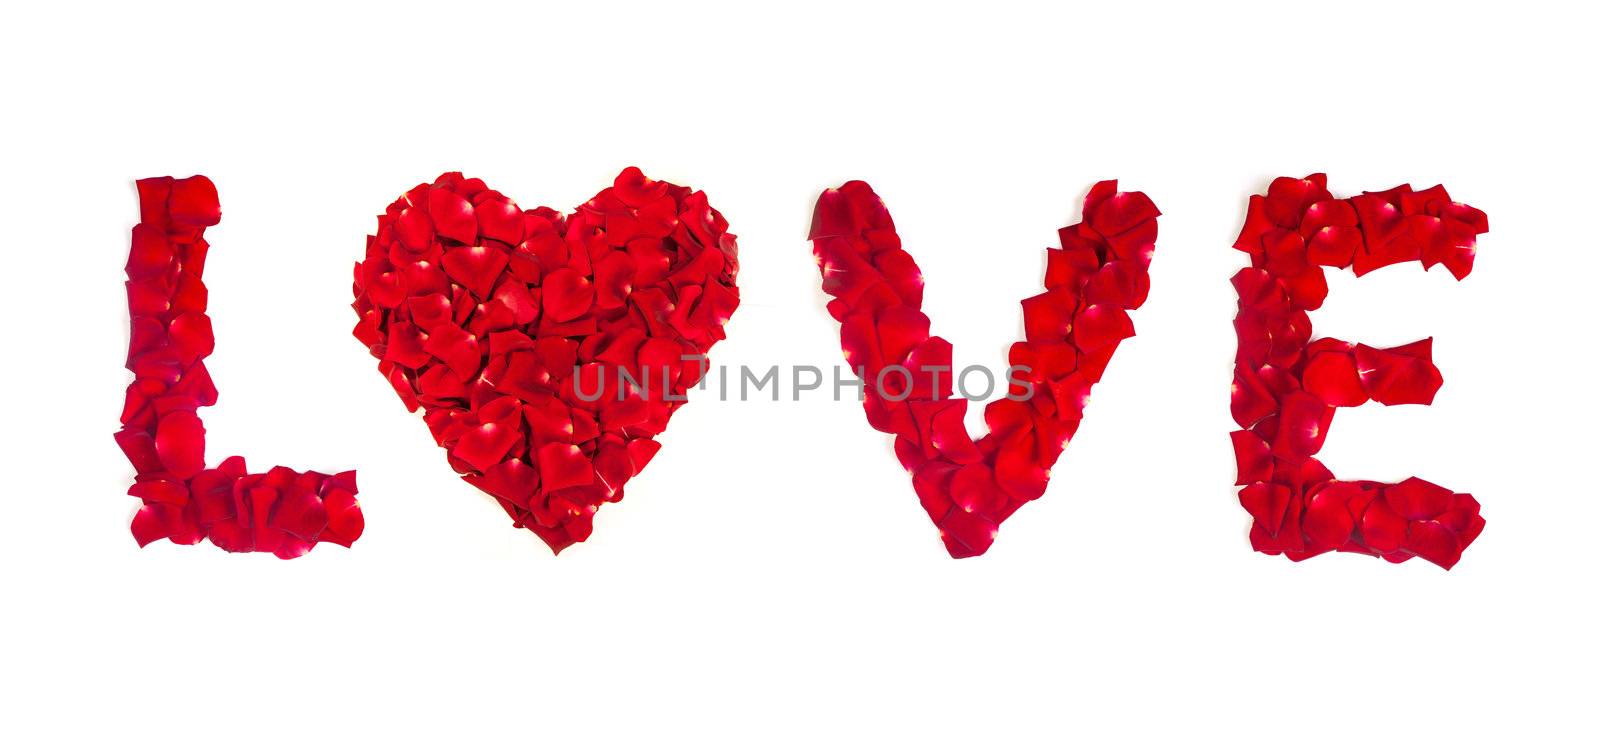 Love of rose petals isolated on white by bloodua